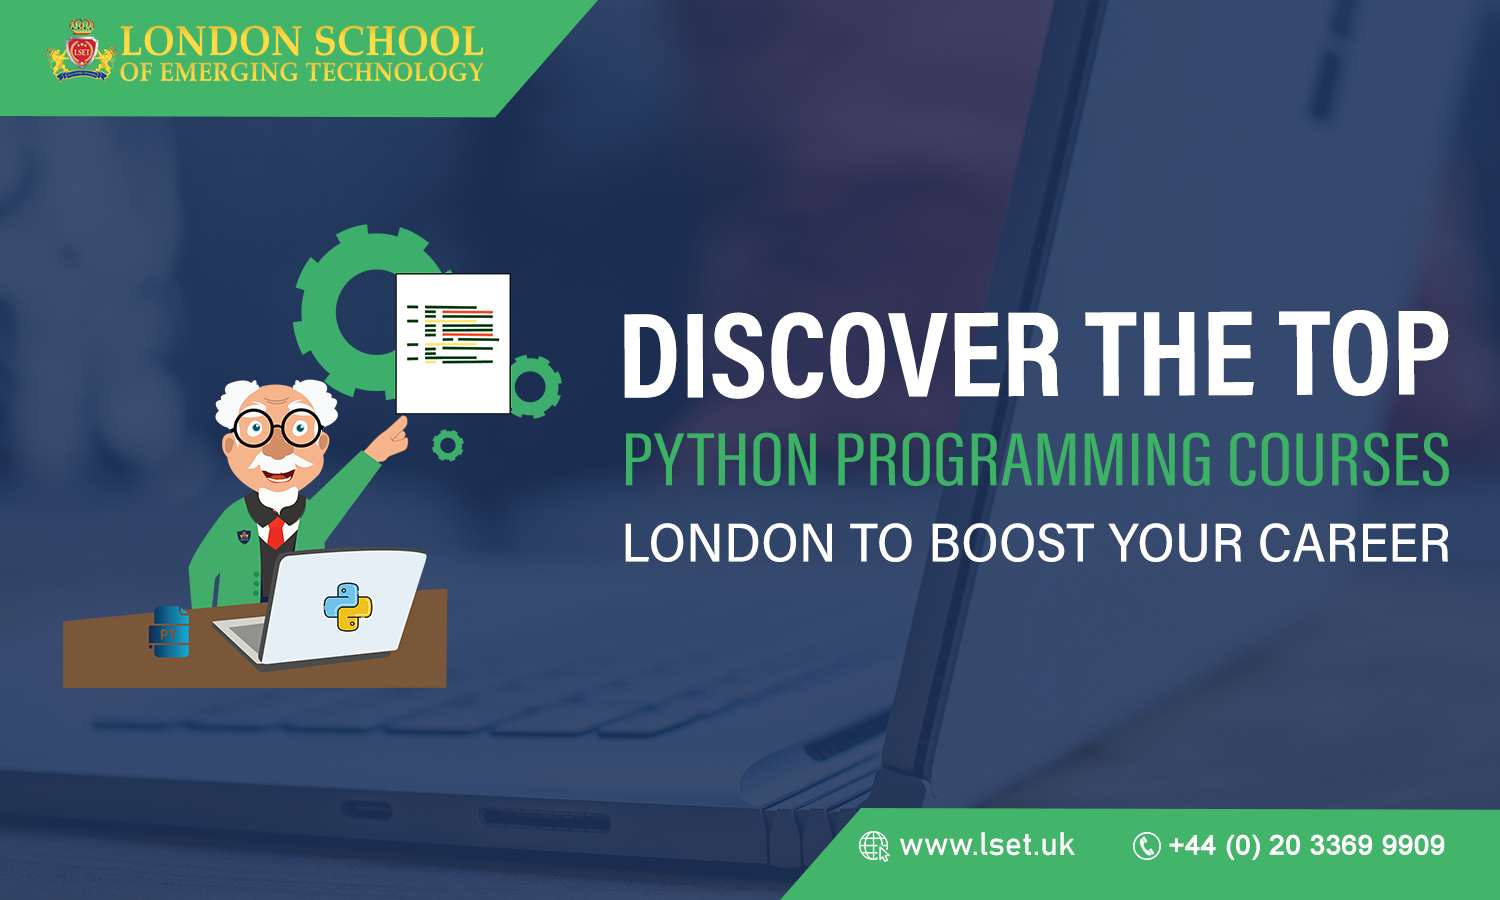 Discover the Top Python Programming Courses in London to Boost Your Career 4.48.20 PM